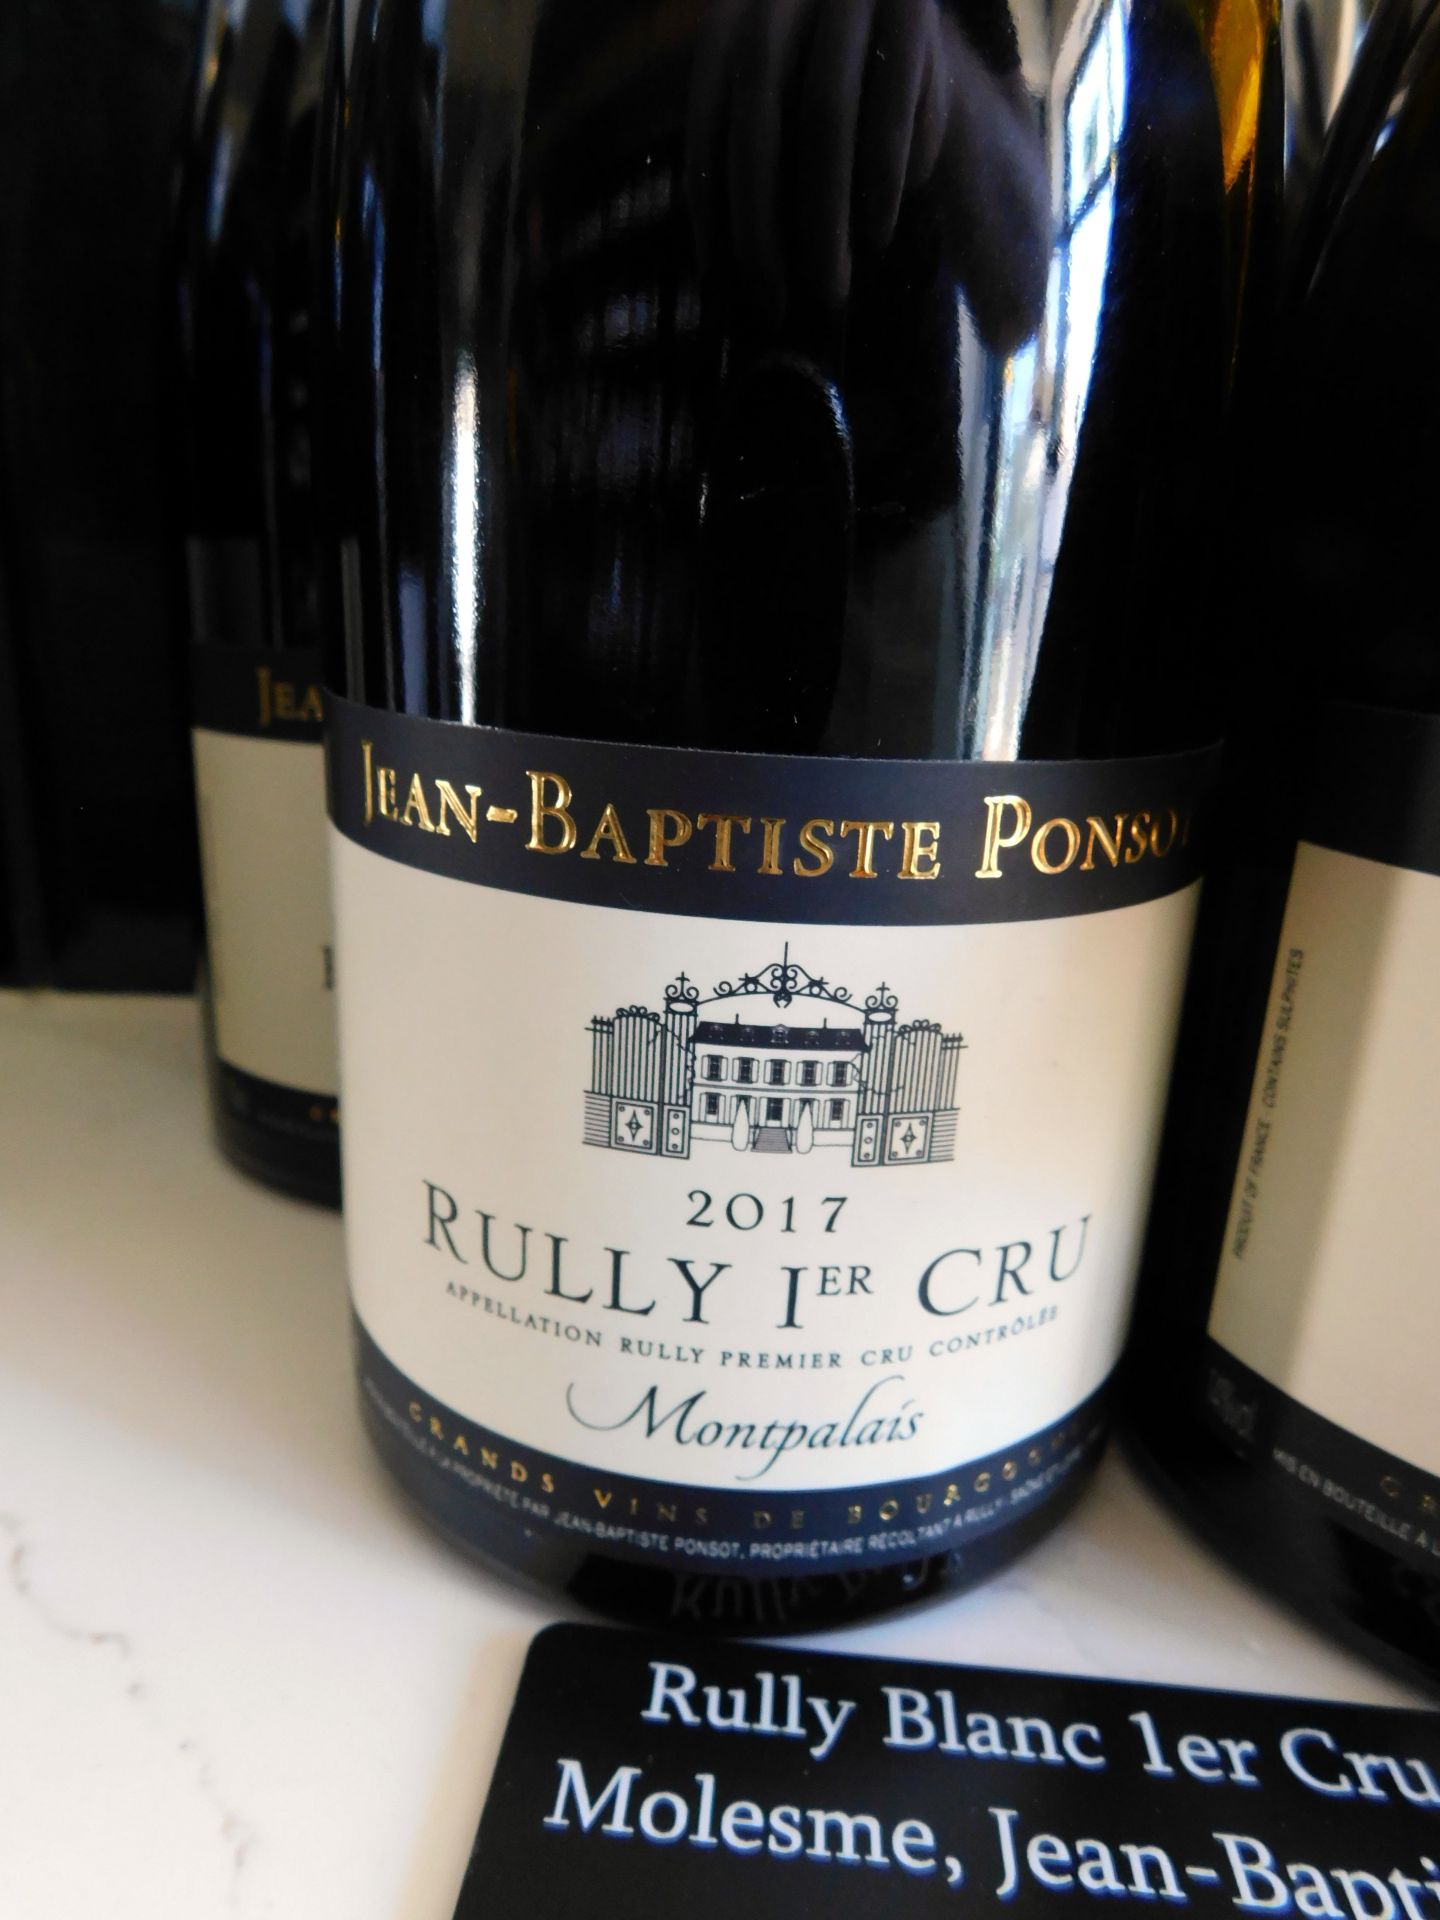 6 Jean-Baptiste Ponsot Rully 1er Cru (Location: Brentwood. Please Refer to General Notes) - Image 2 of 2